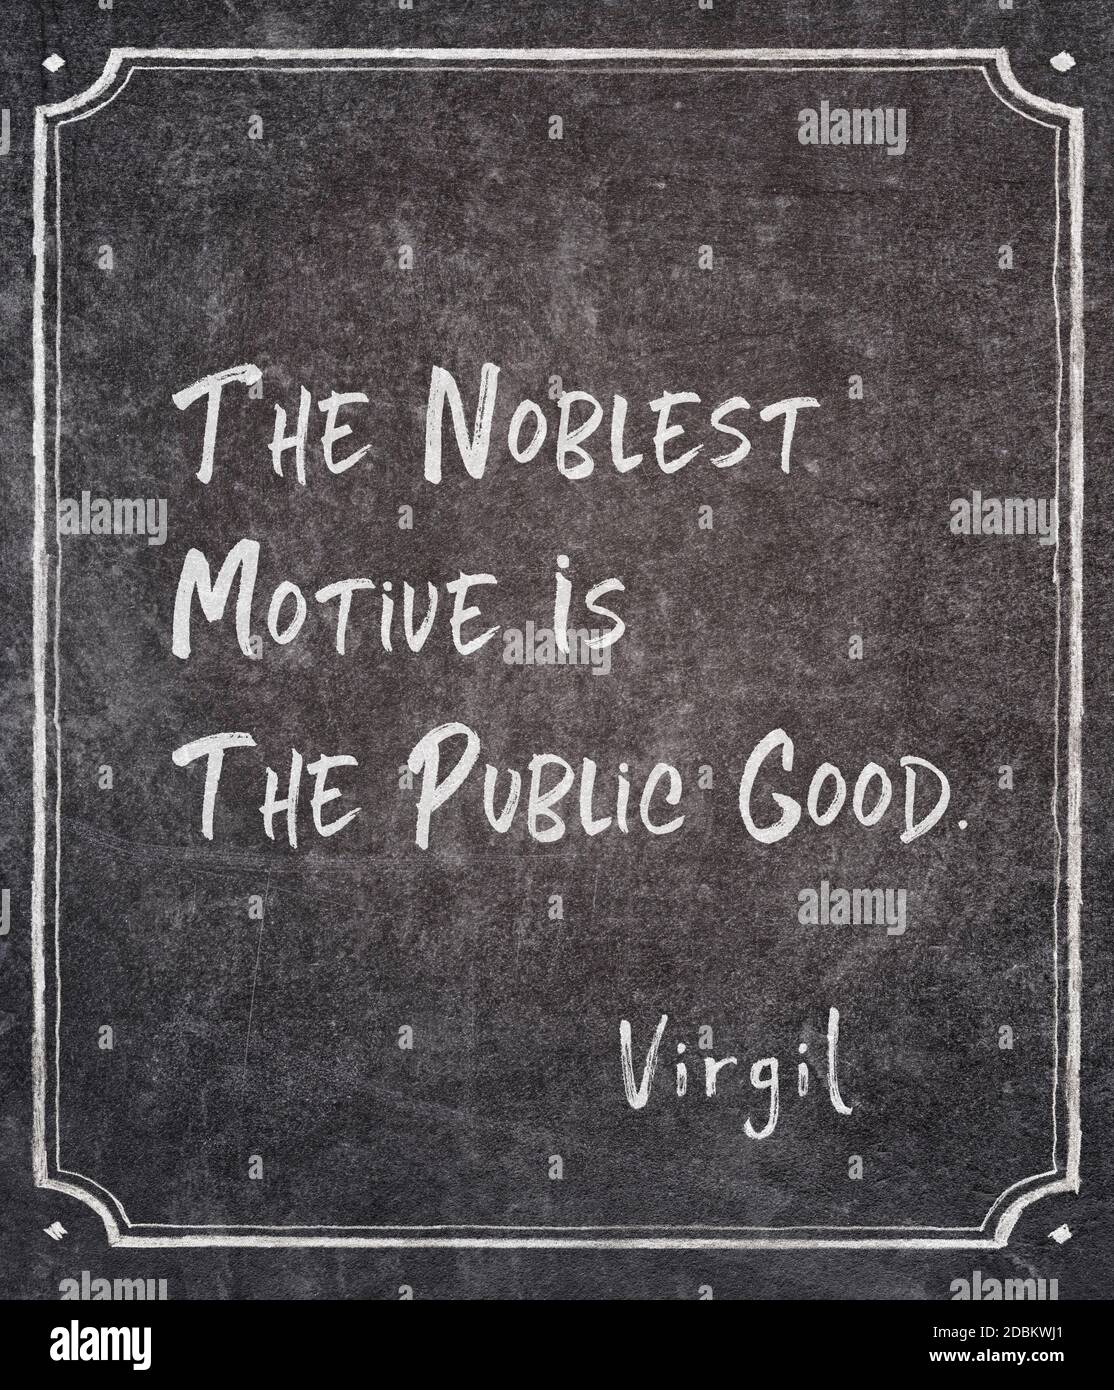 The noblest motive is the public good - ancient Roman philosopher and poet Virgil quote written on framed chalkboard Stock Photo